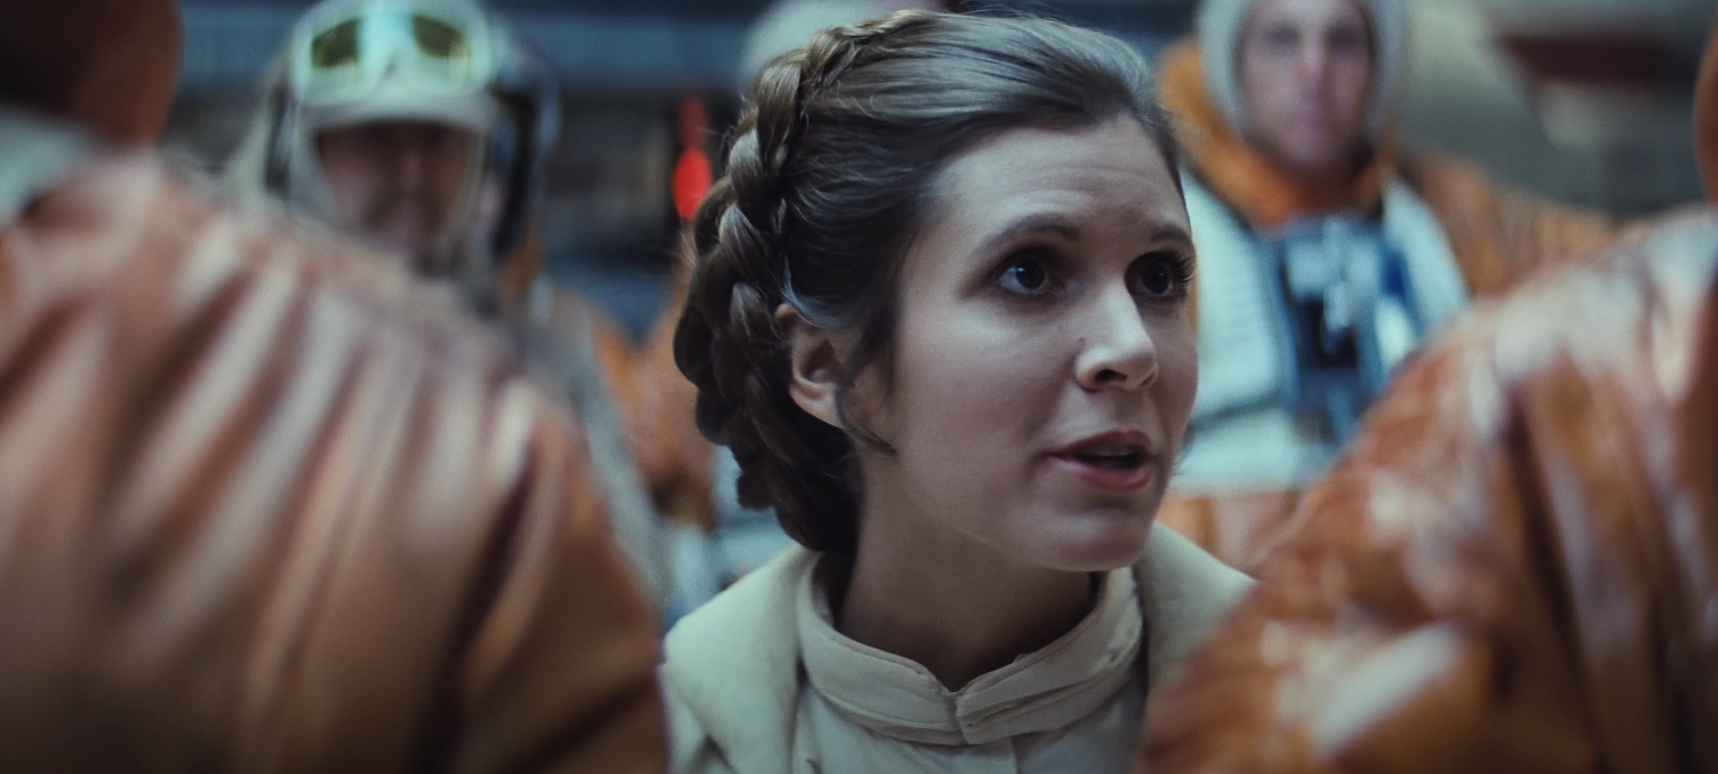 Princess Leia in white robe with hair buns, surrounded by Rebel fighters in orange jumpsuits